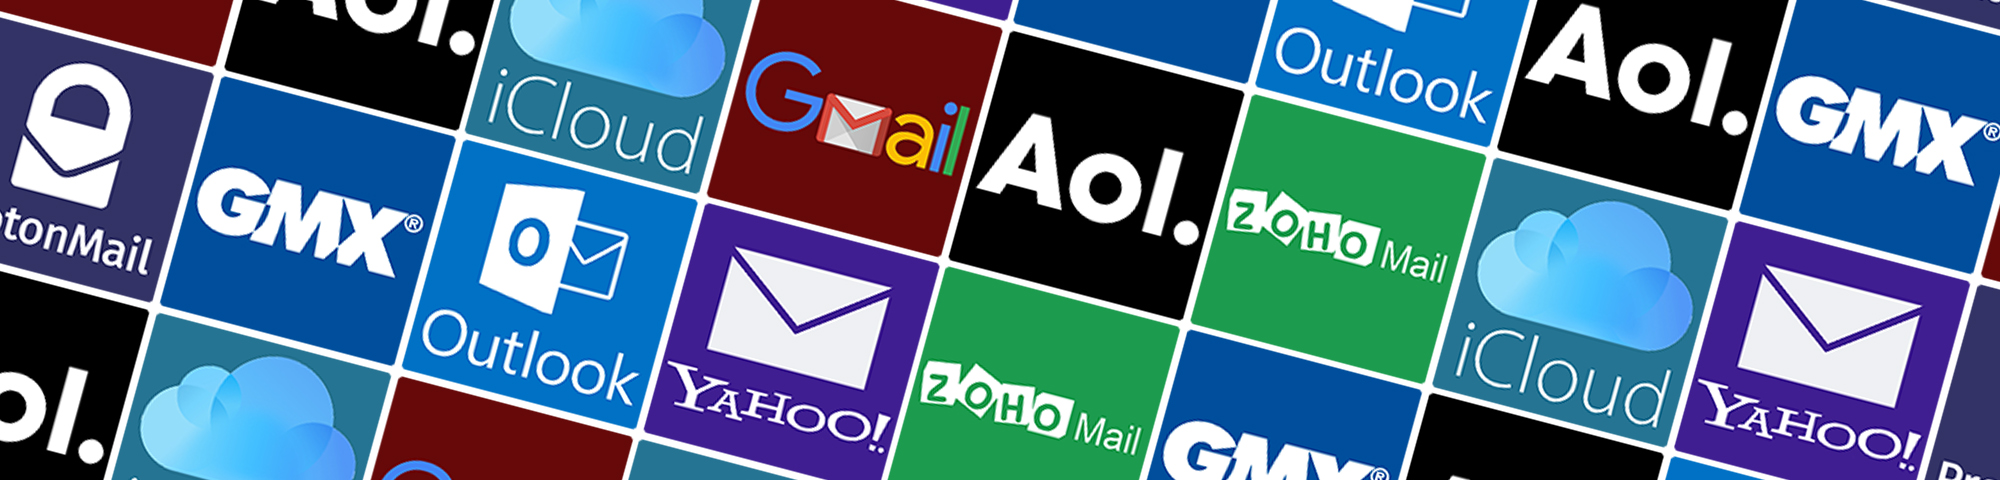 Best Free Email Services Gmail Vs Outlook Vs Yahoo Vs Zoho